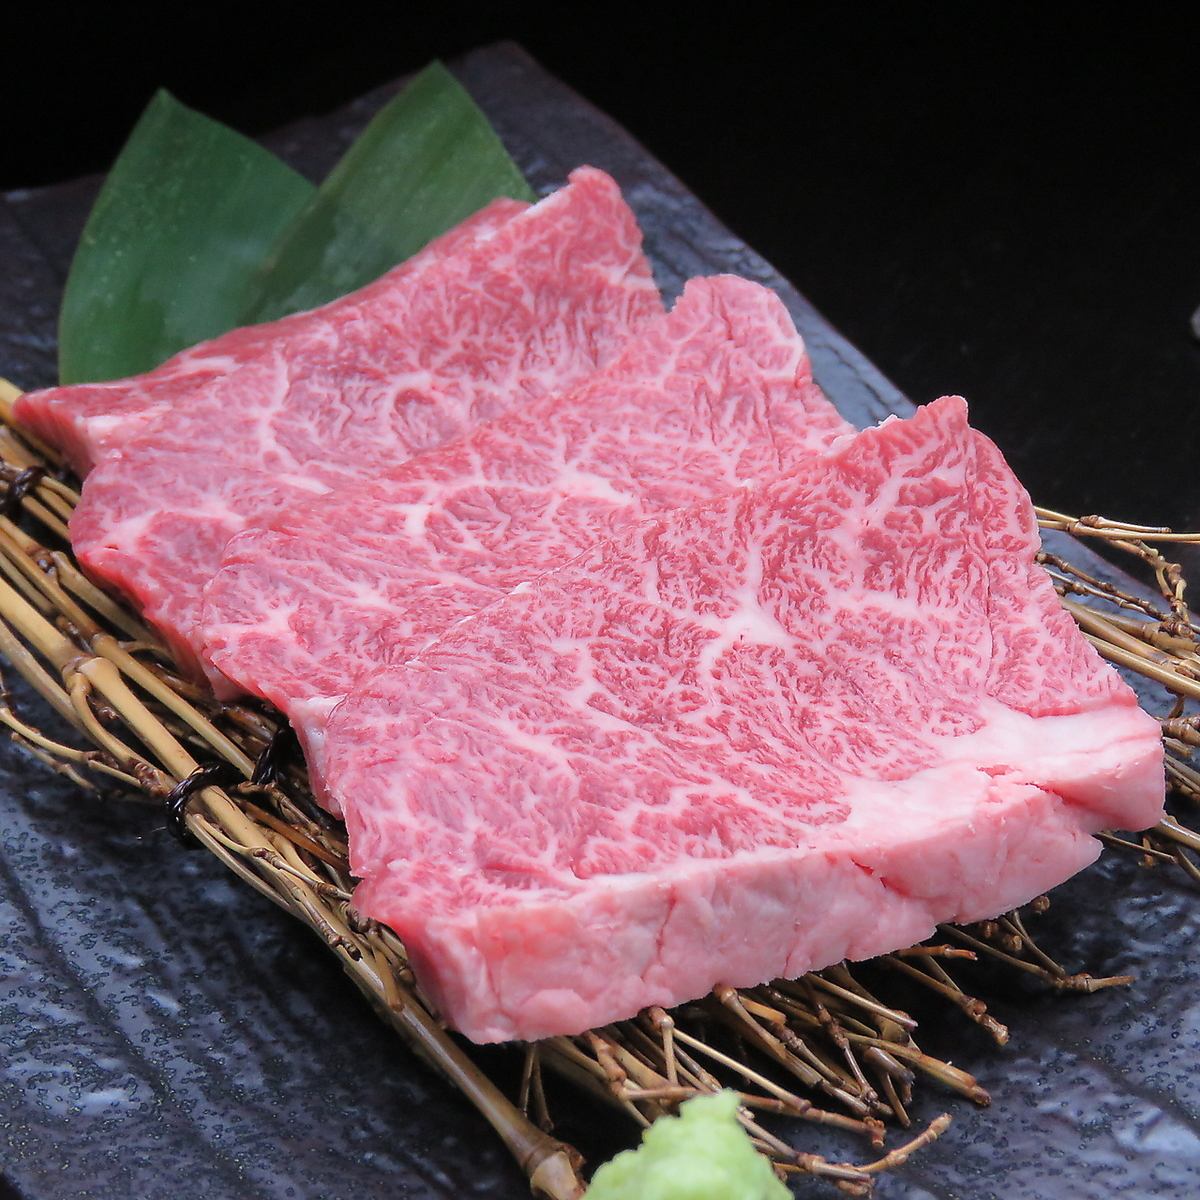 Directly from Shibaura! Offering carefully selected fresh meat at a reasonable price